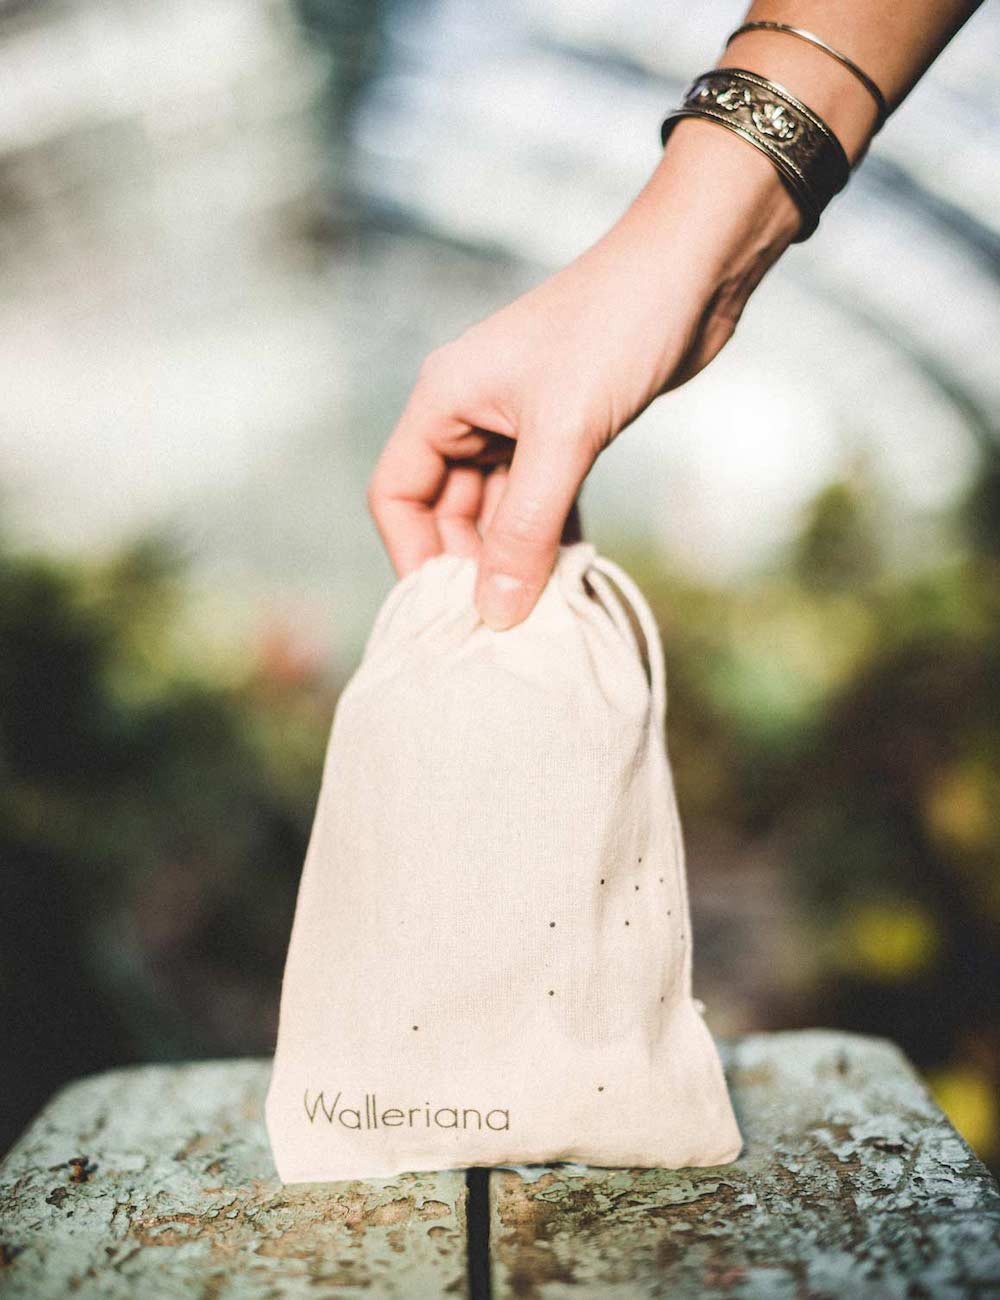 Walleriana clutch for tights - to carry & protect them at all times